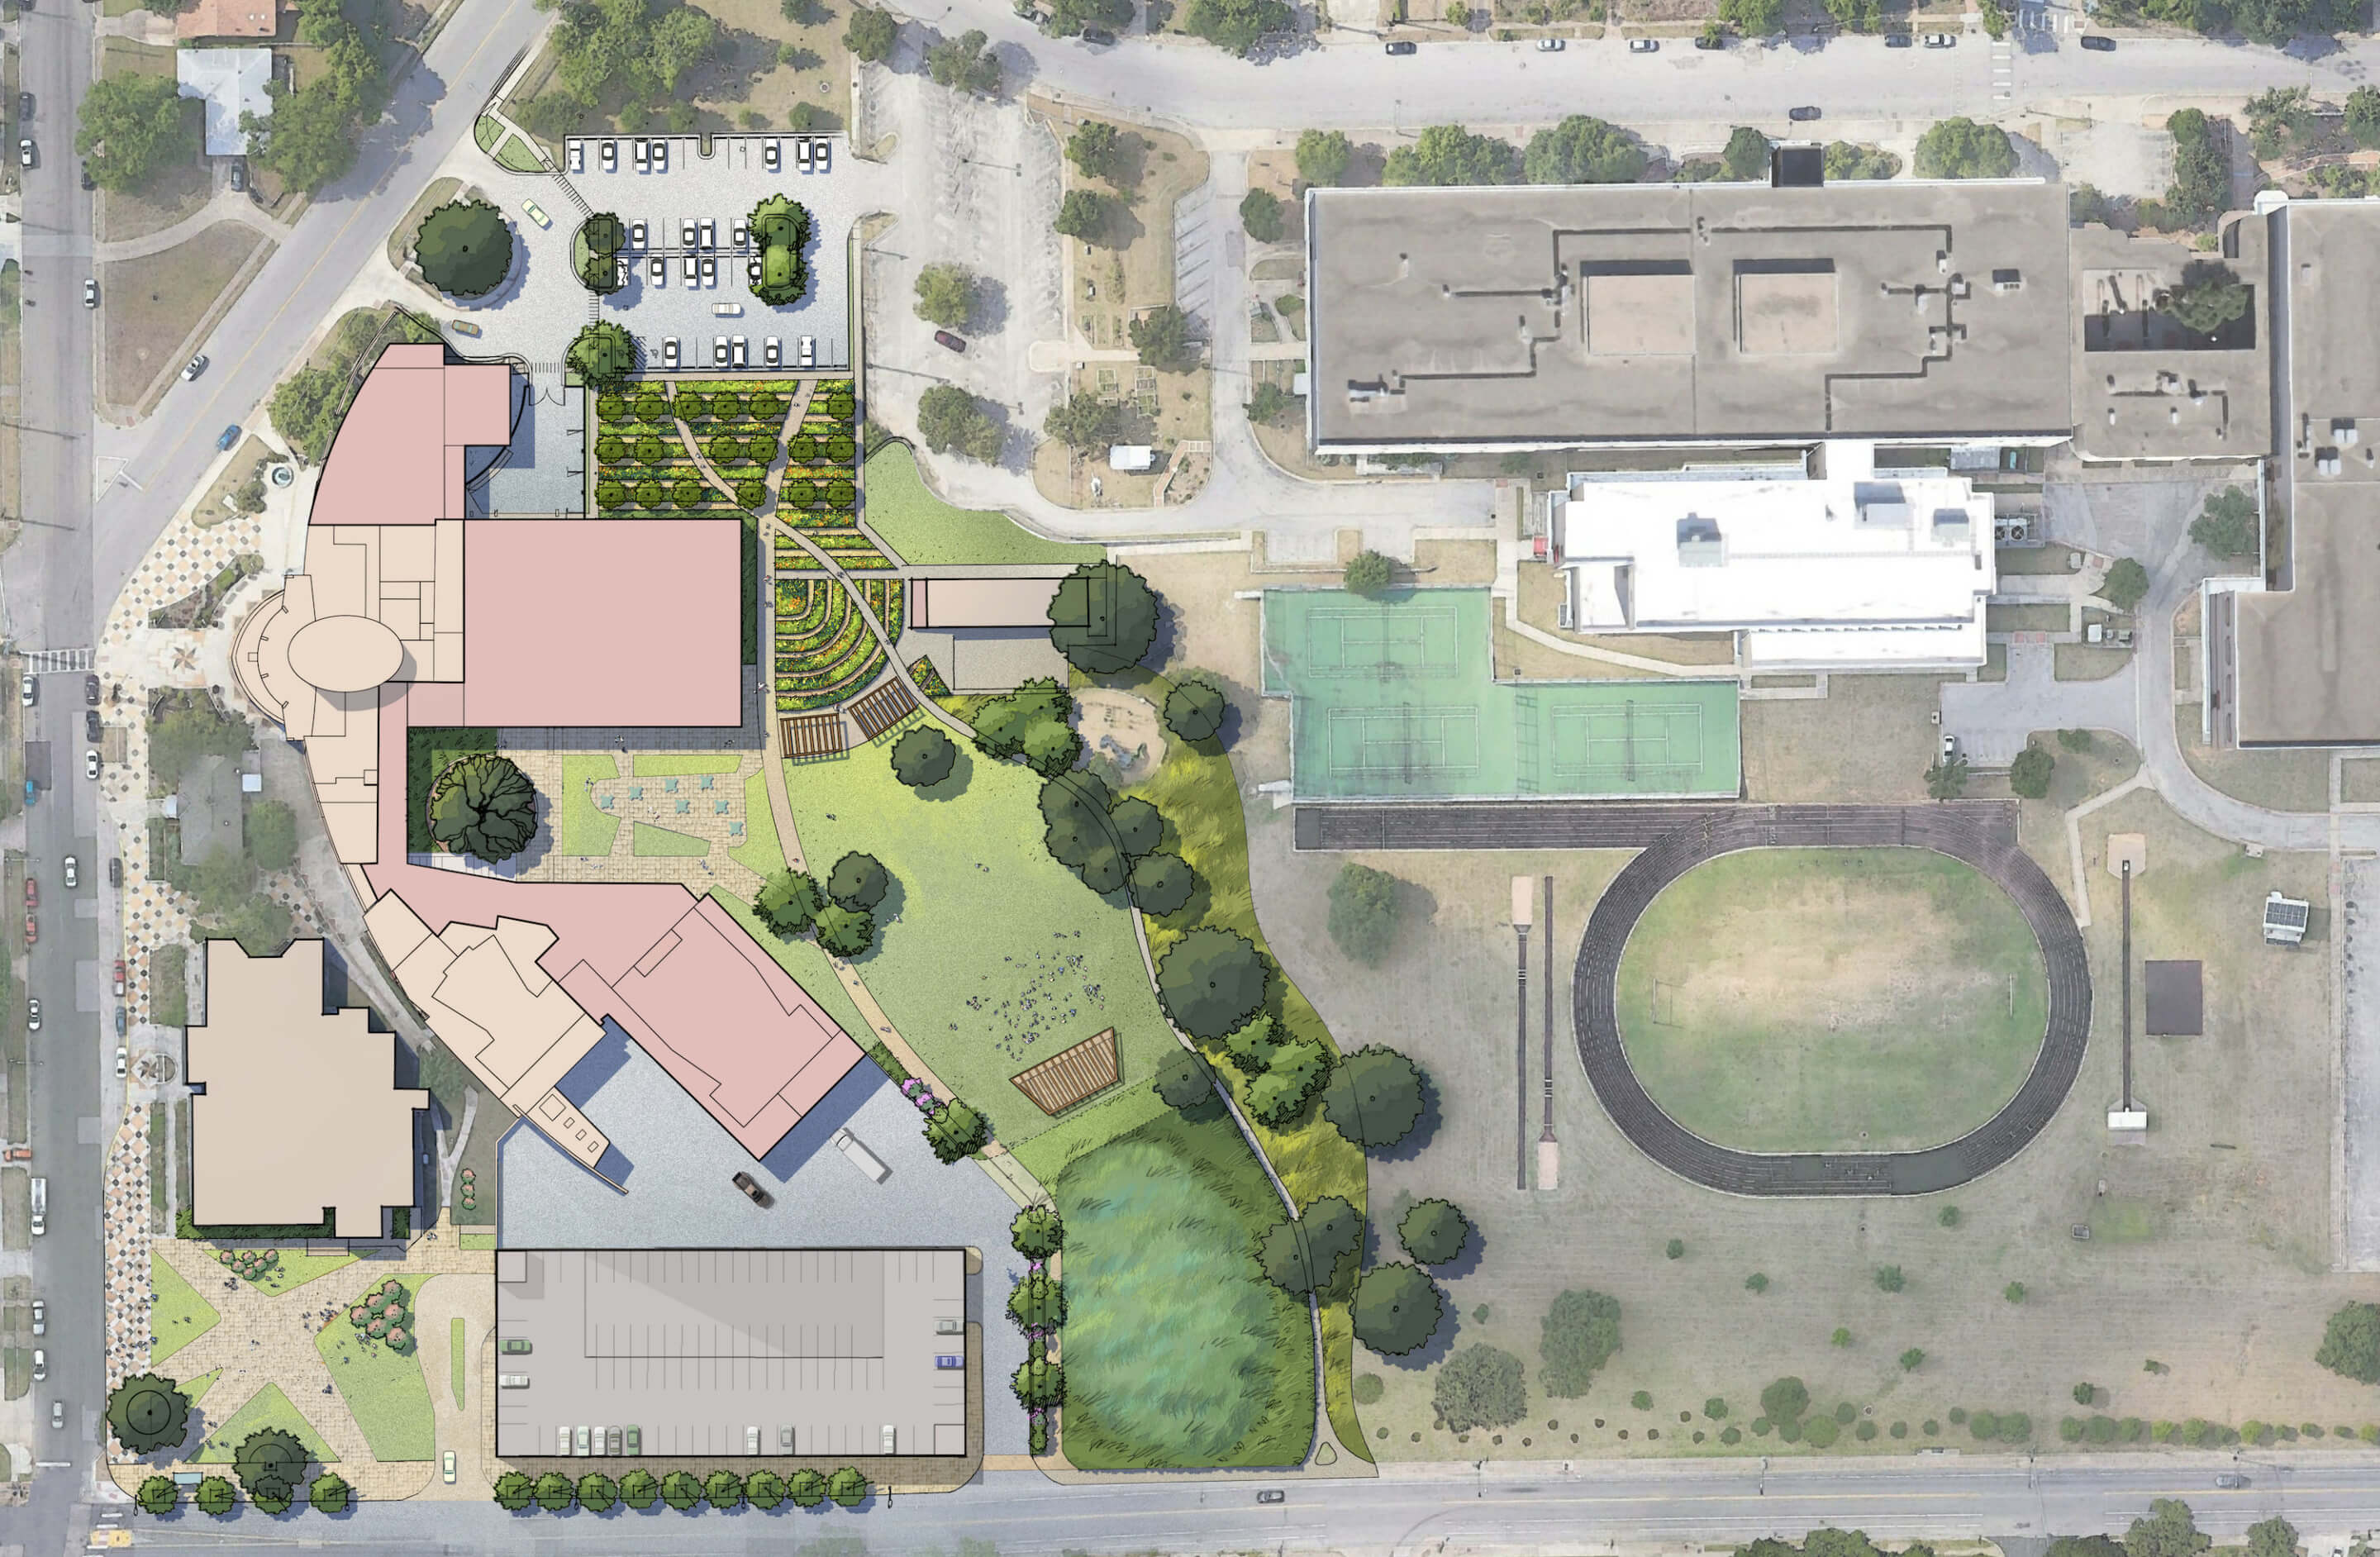 aerial site plan of a the forthcoming carver museum revamp and expansion